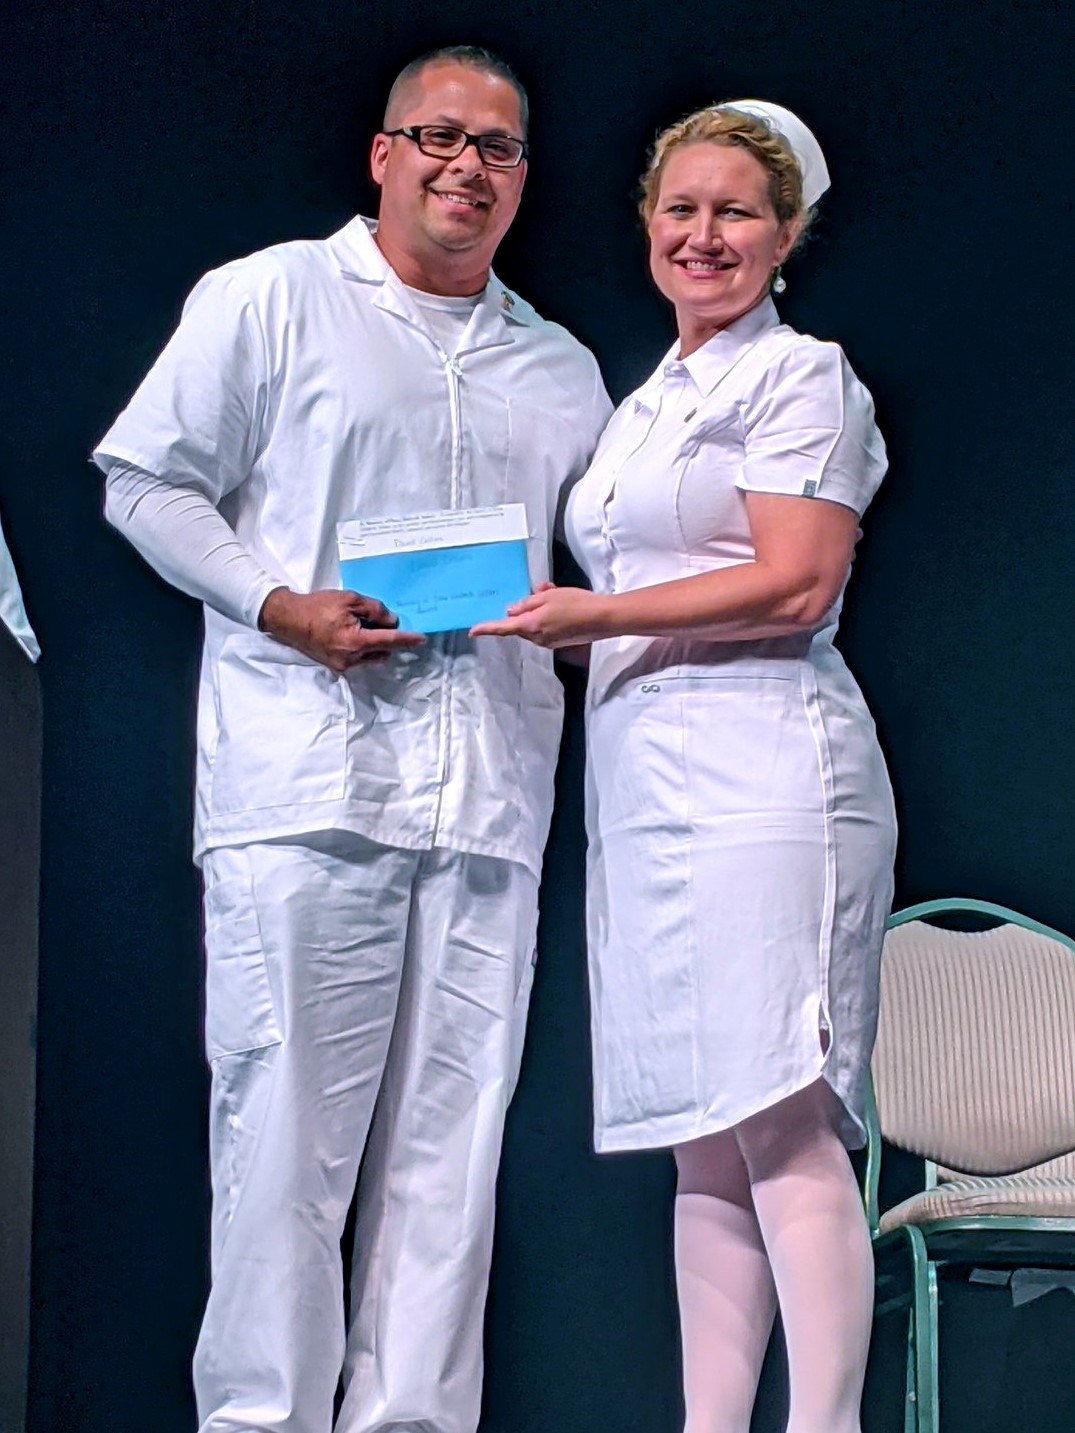 David Collins stands with a nursing instructor during the ADN pinning ceremony.